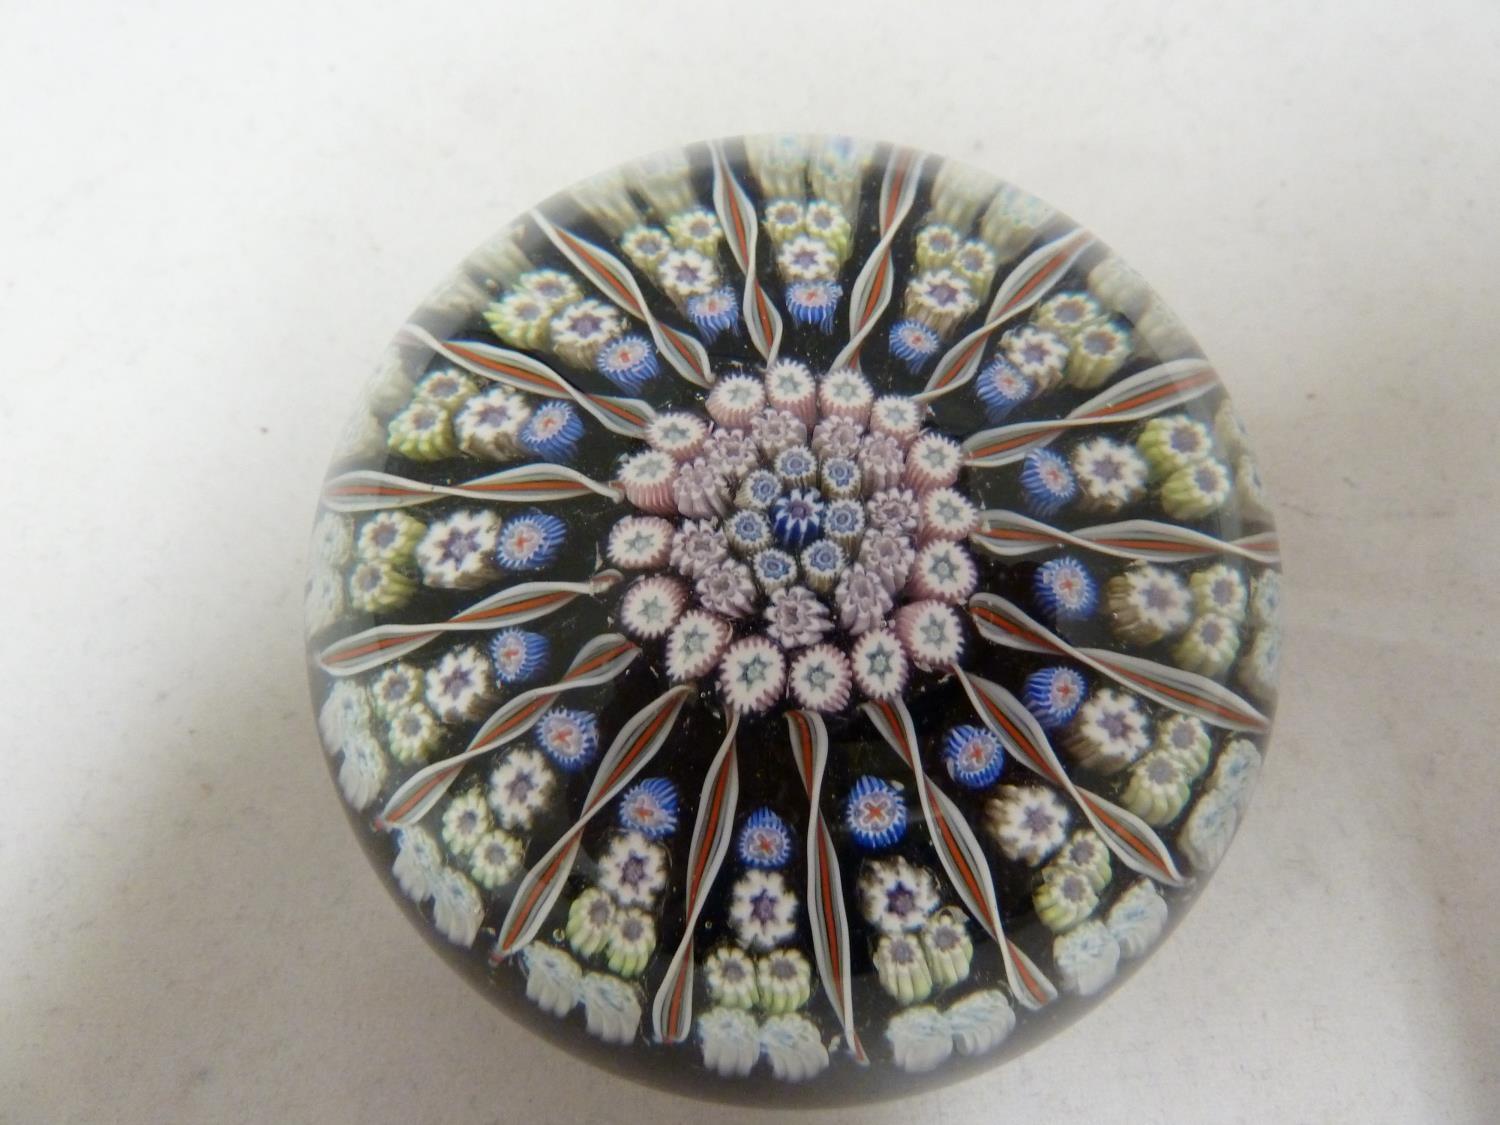 Perthshire - a glass paperweight, concentric millifiore canes, interspersed with candy twist